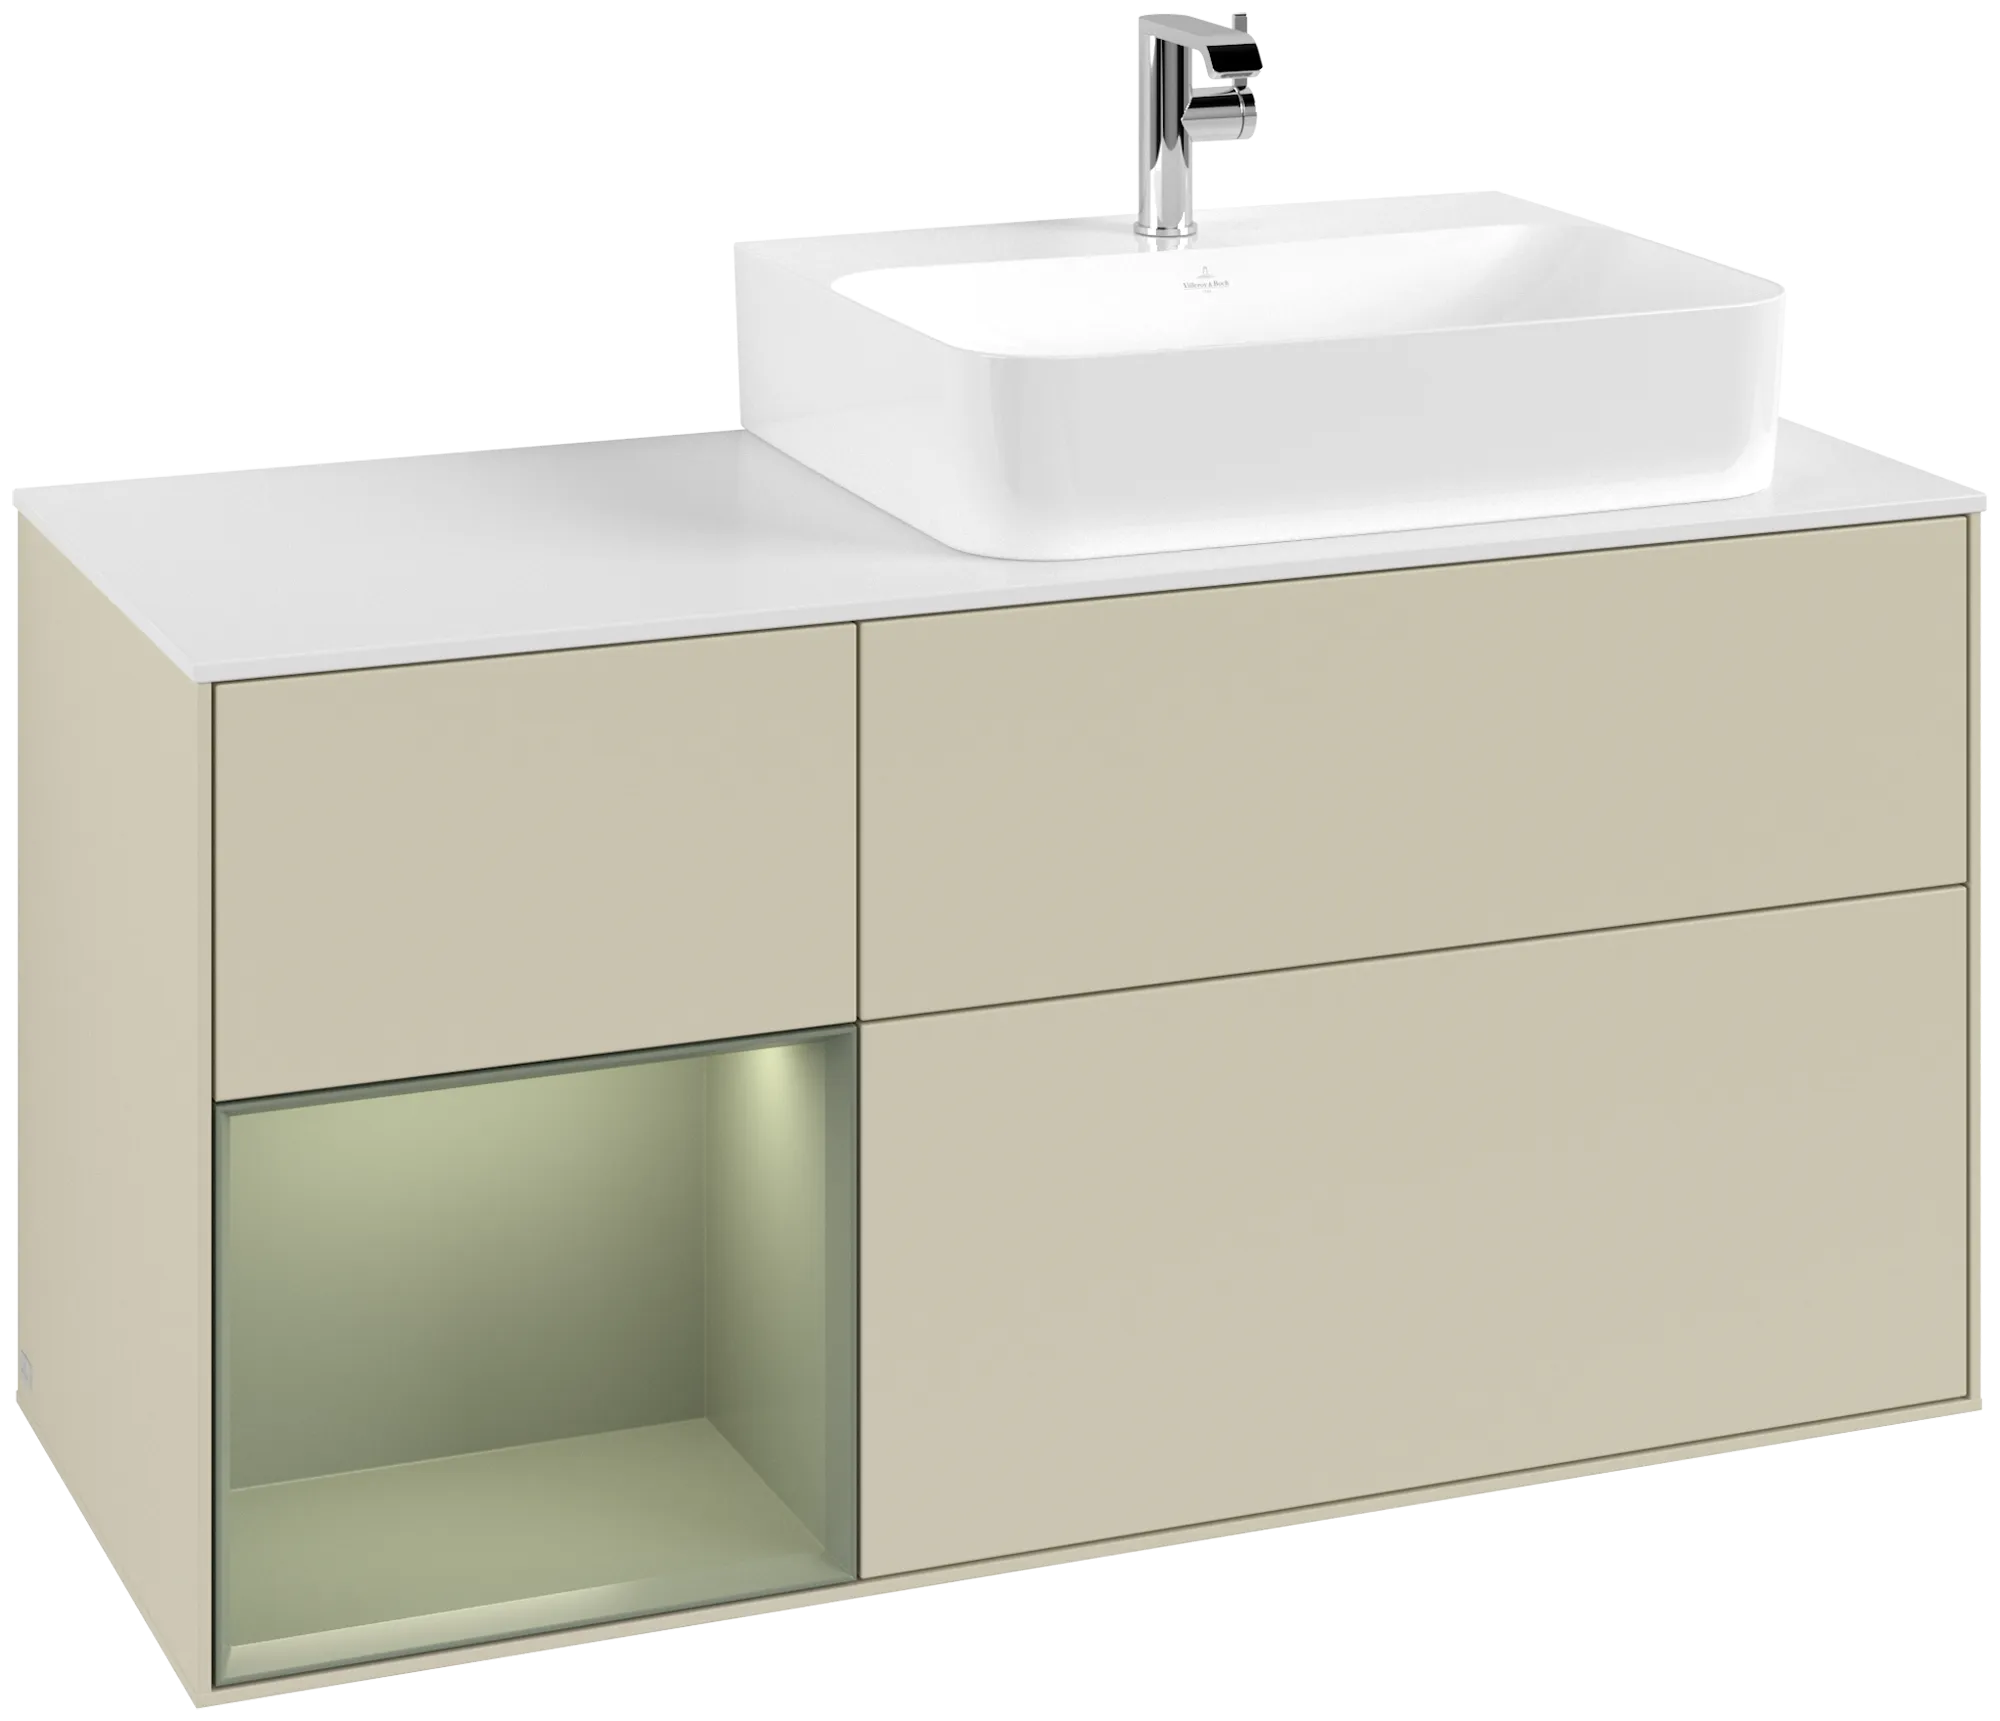 Picture of VILLEROY BOCH Finion Vanity unit, with lighting, 3 pull-out compartments, 1200 x 603 x 501 mm, Silk Grey Matt Lacquer / Olive Matt Lacquer / Glass White Matt #G141GMHJ